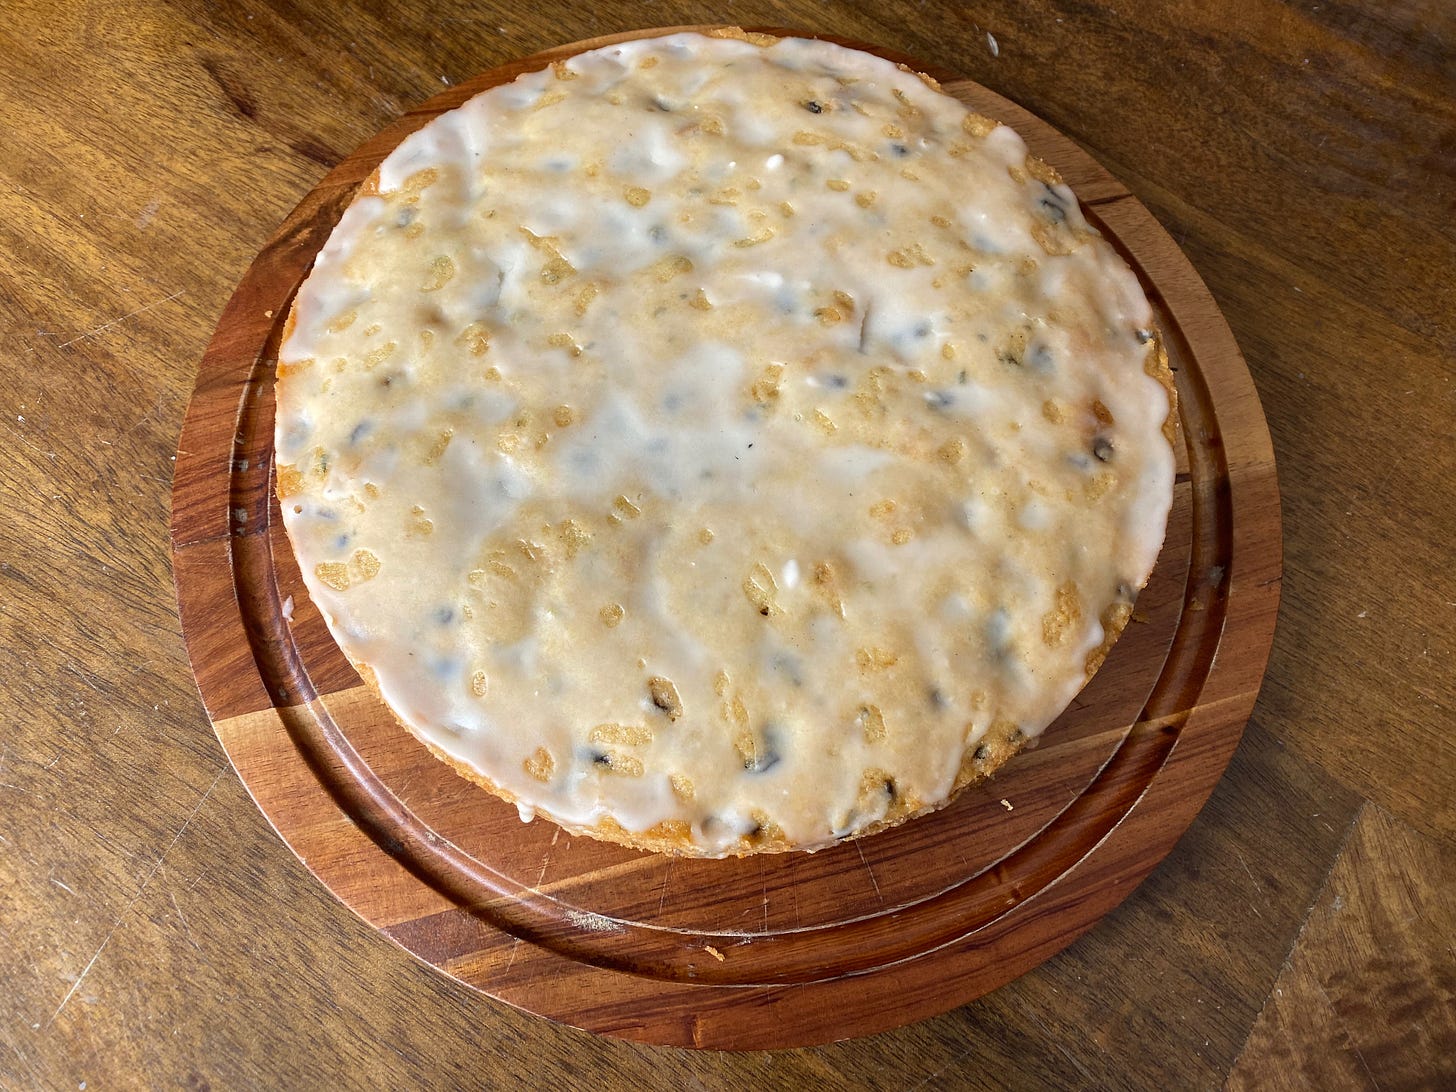 A round cake drizzled  with a thin lemon glaze and studded with specks of rosemary sits on a wooden cake board.